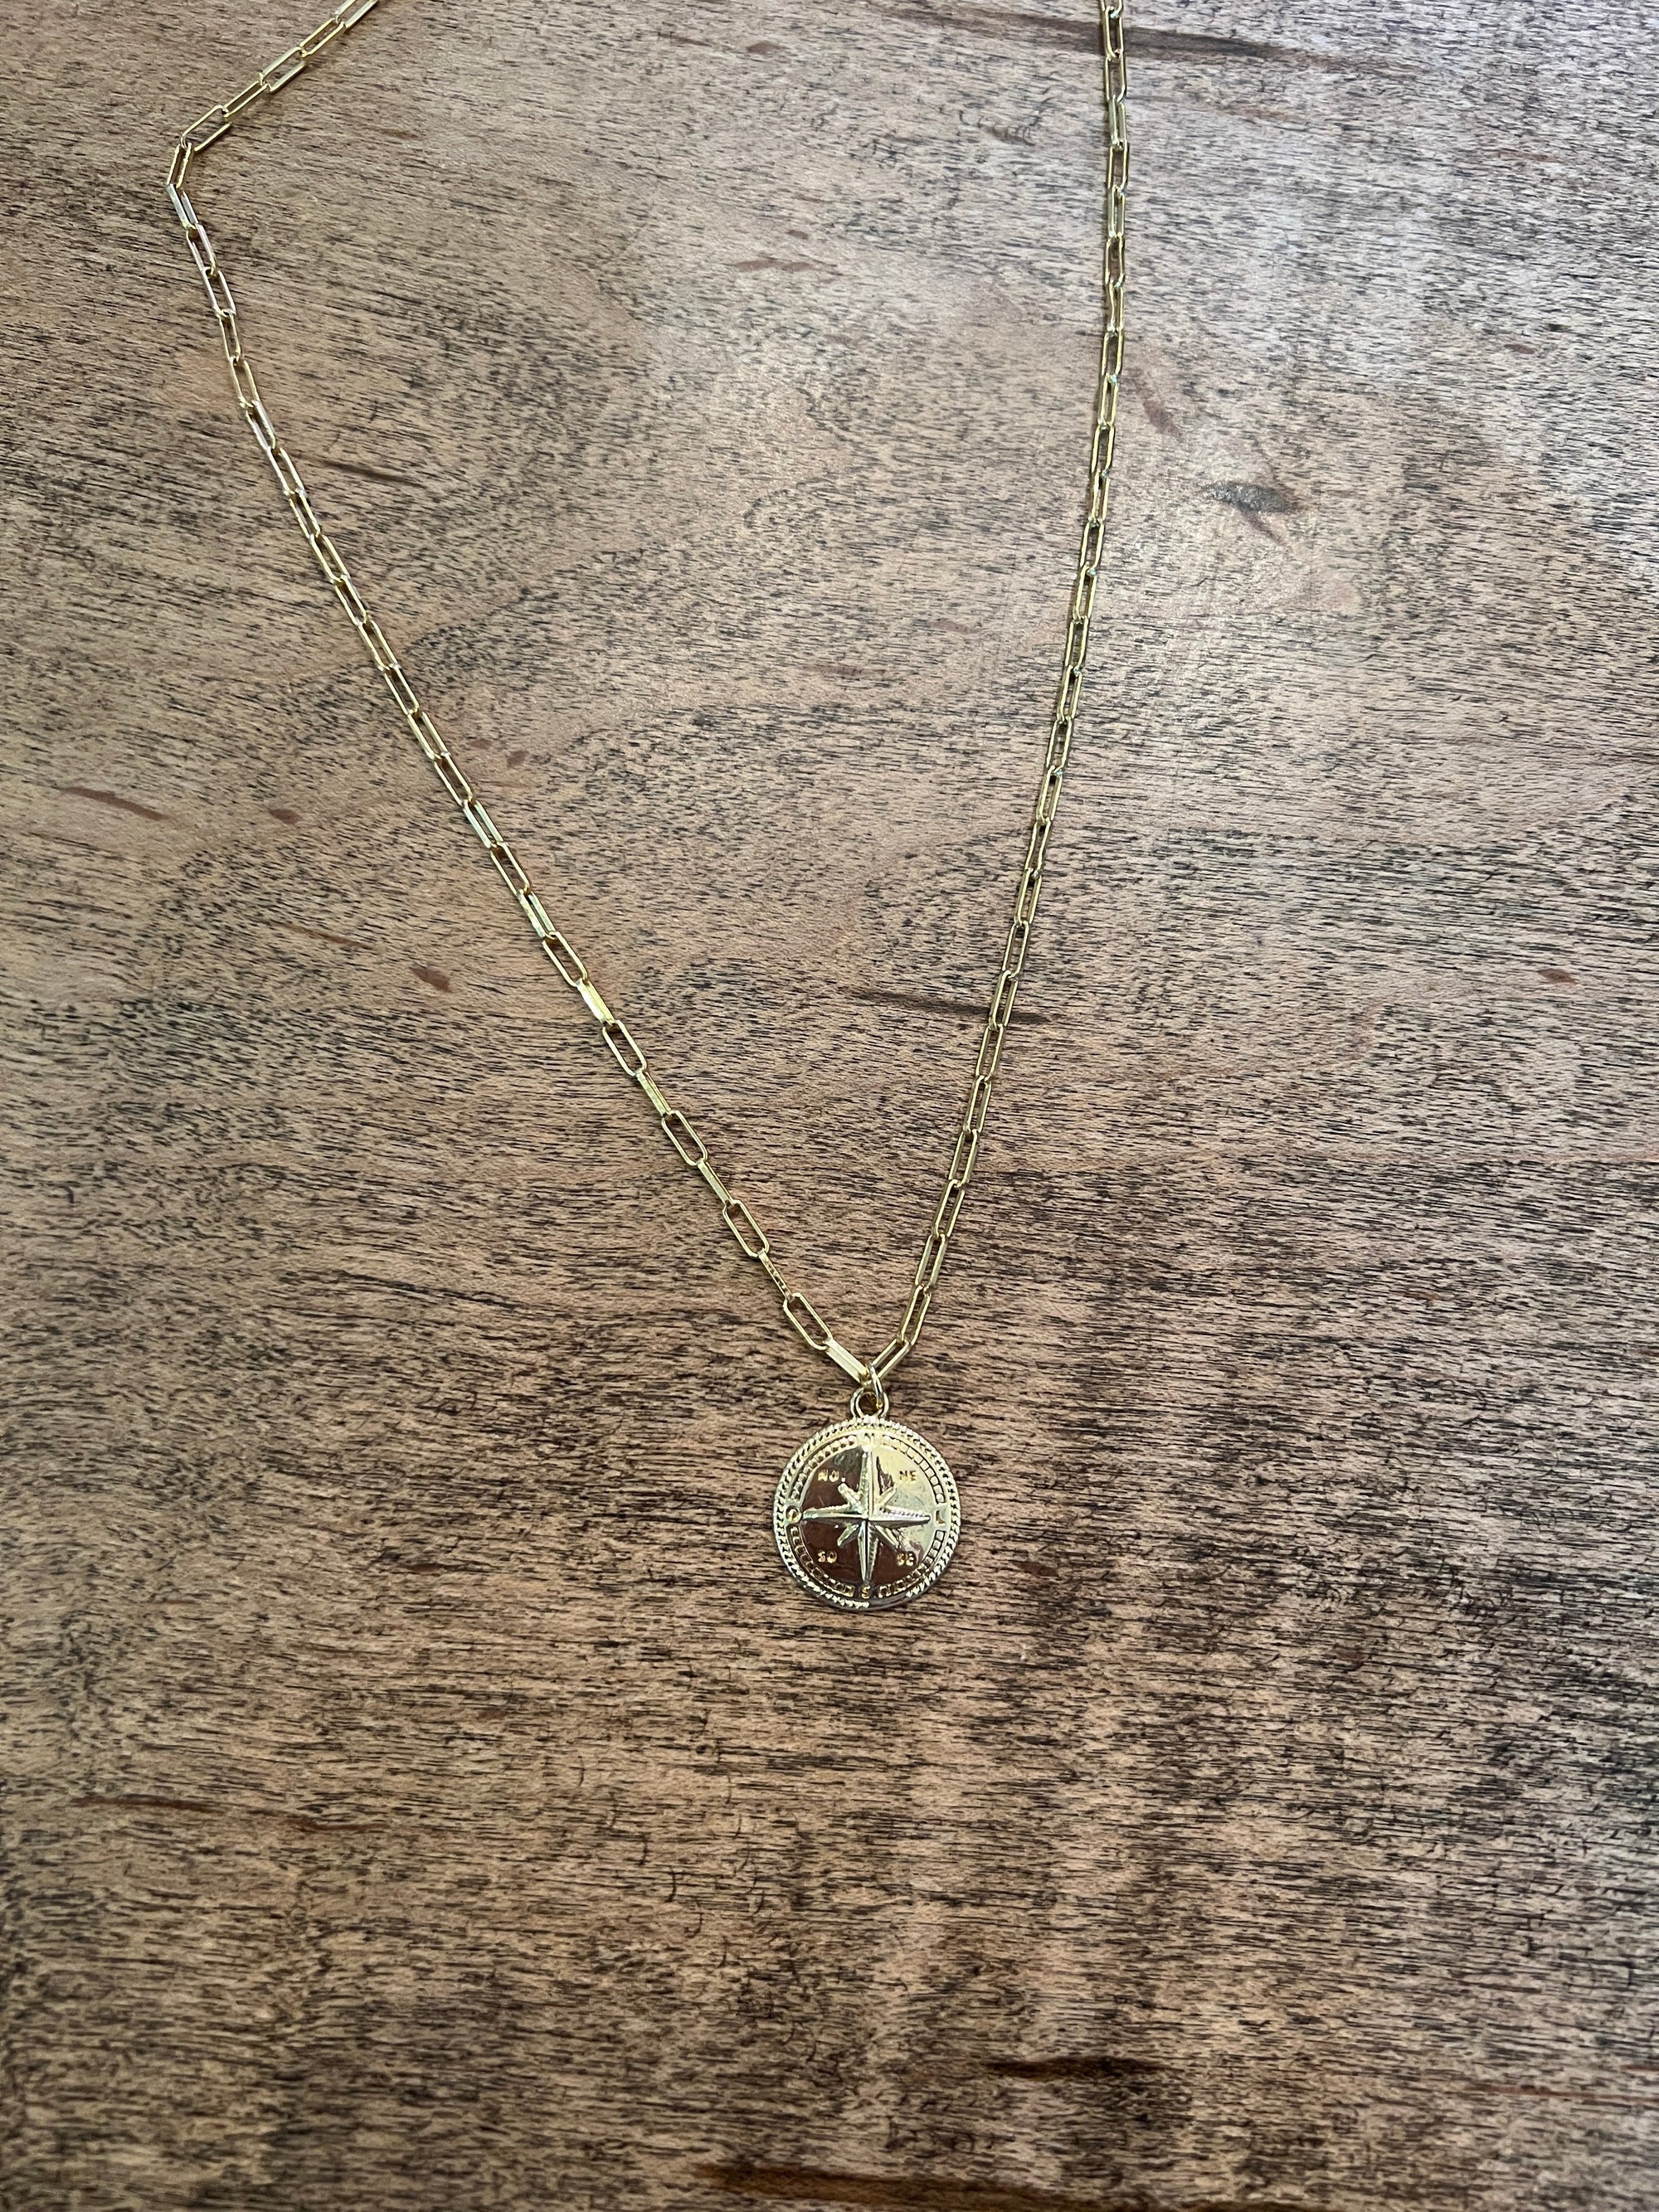 Where to Next Compass Necklace